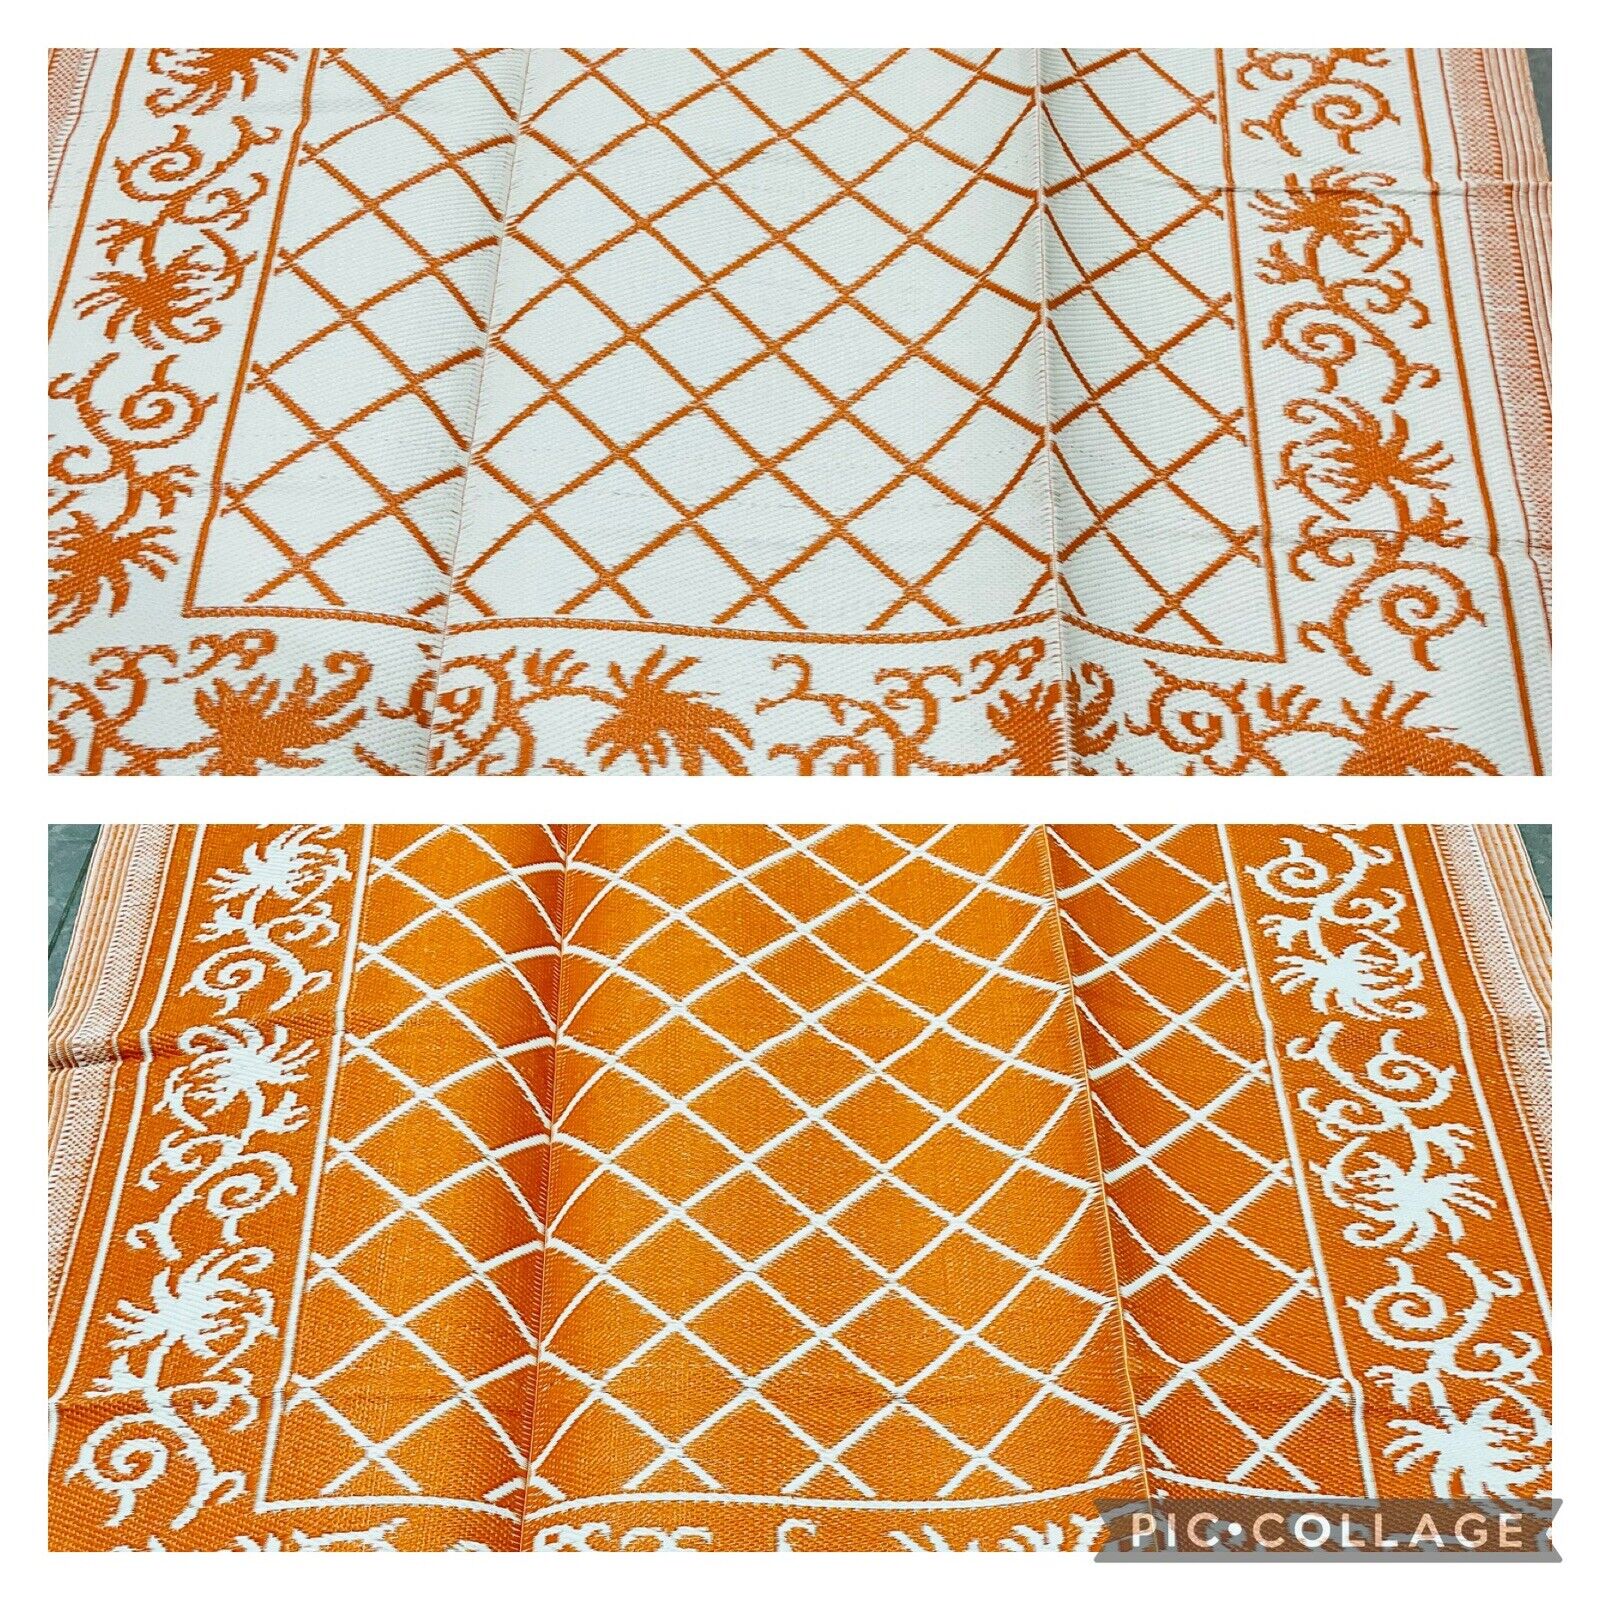 DOUBLE SIDED REVERSIBLE Plastic Mat | Picnic Beach RUG Chatai 1.83 X 1.83mt